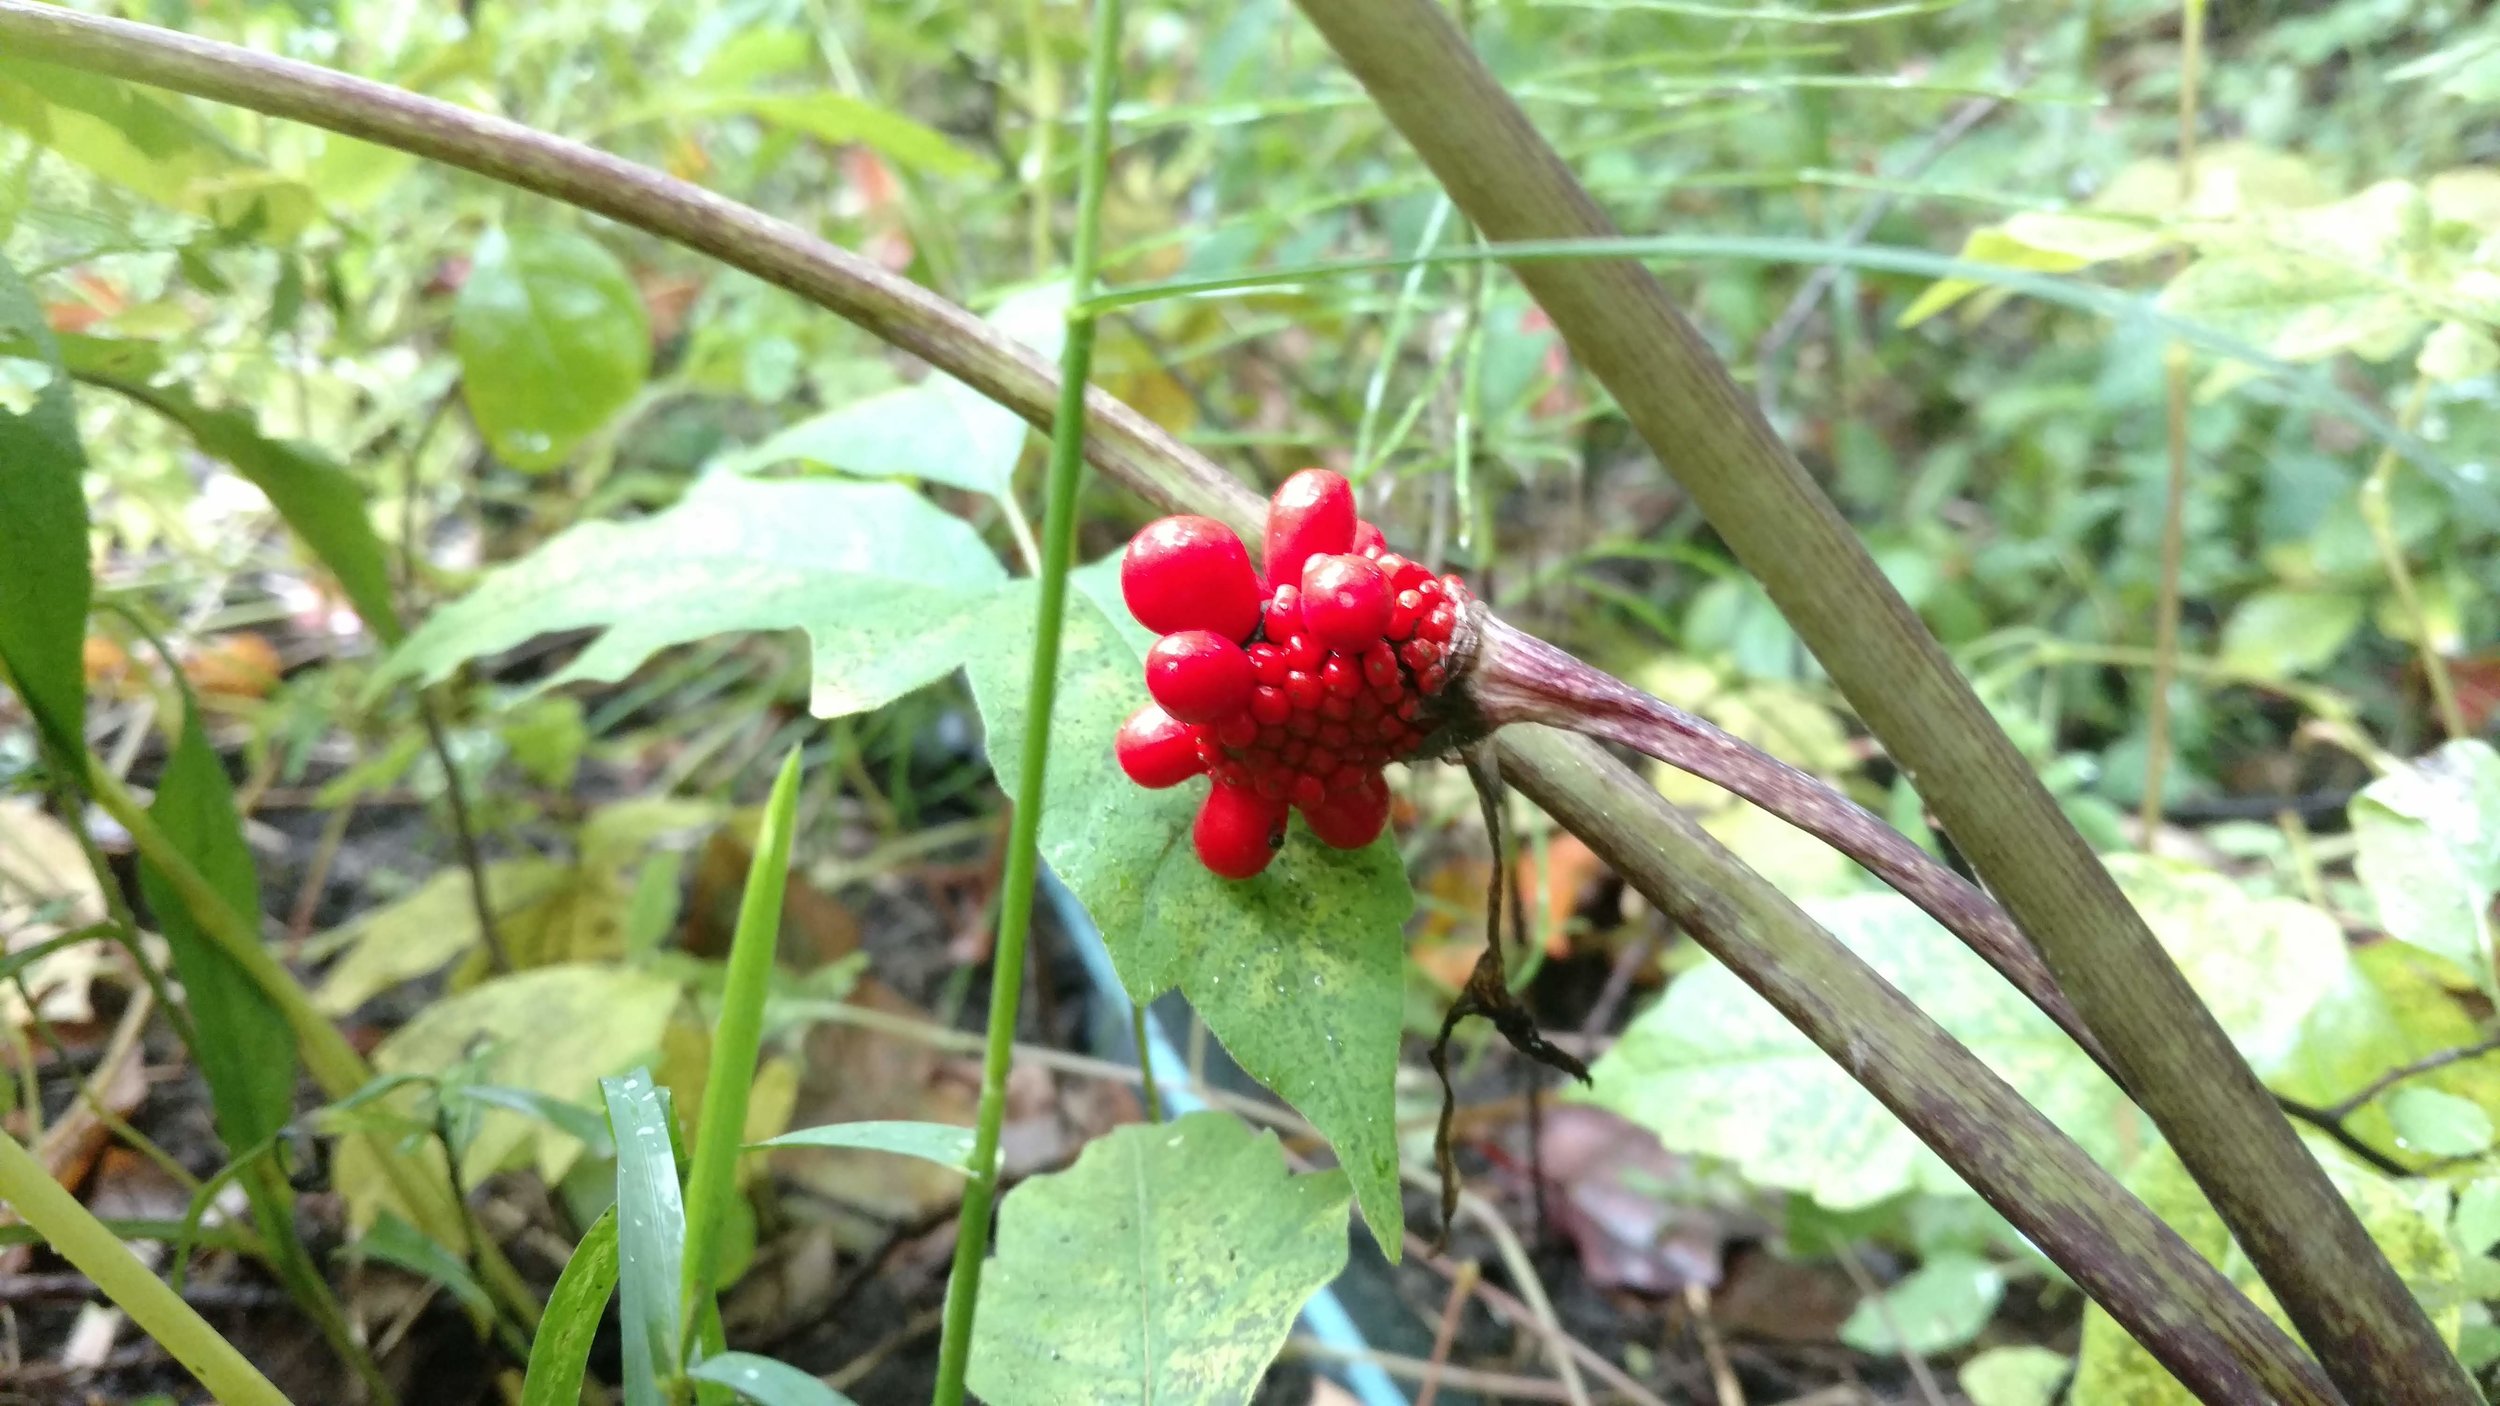 Jack in the pulpit berries